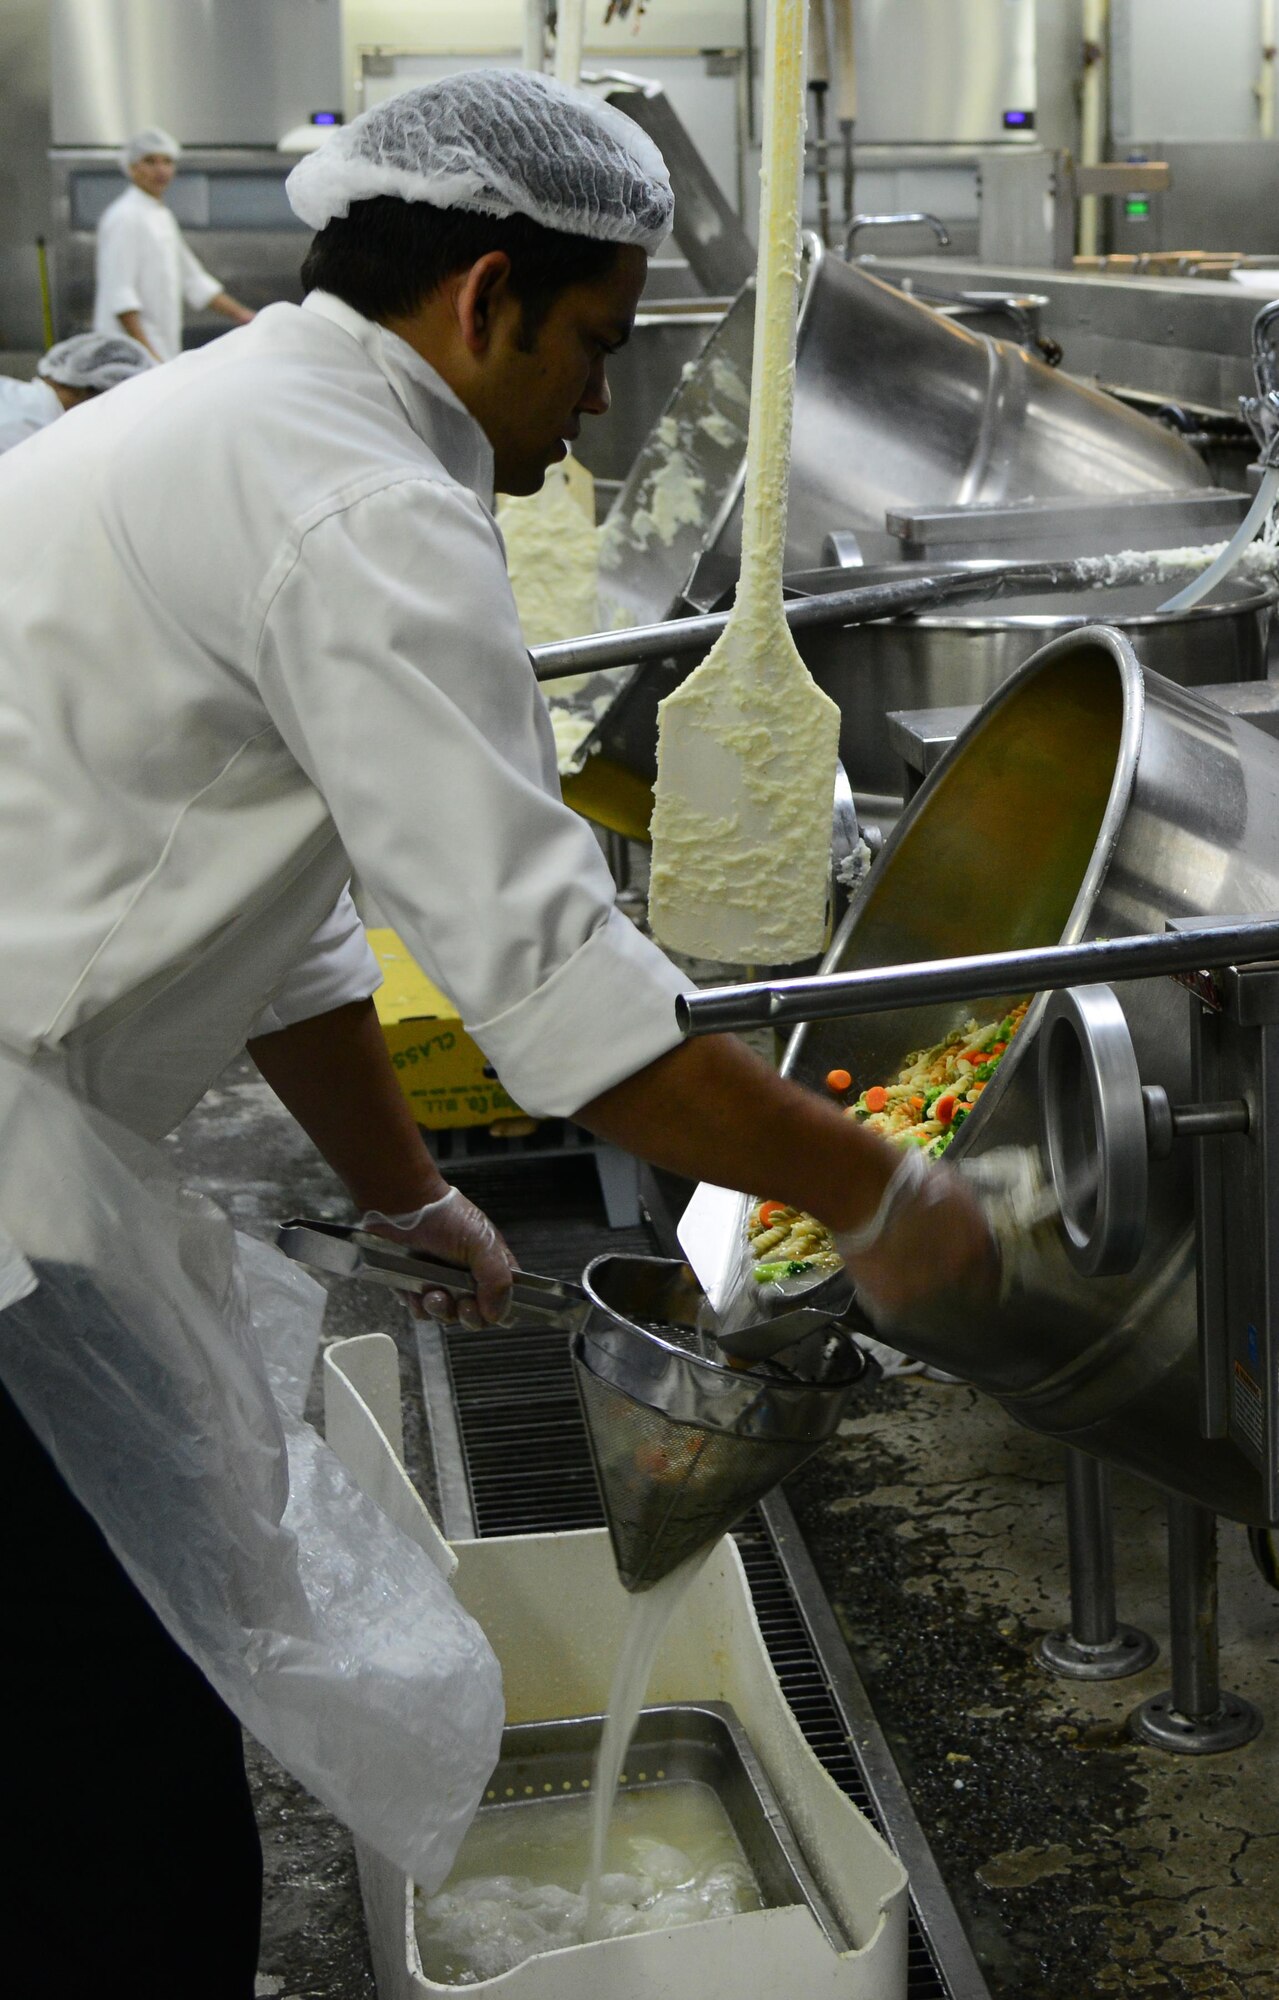 A food service contractor prepares meals for U.S. servicemembers at one of three dining facilities at Al Udeid Air Base, Qatar.  The 379th Expeditionary Force Support Squadron at AUAB serves meals to over 15,000 servicemembers daily.  (U.S. Air Force photo by Senior Airman Kia Atkins)